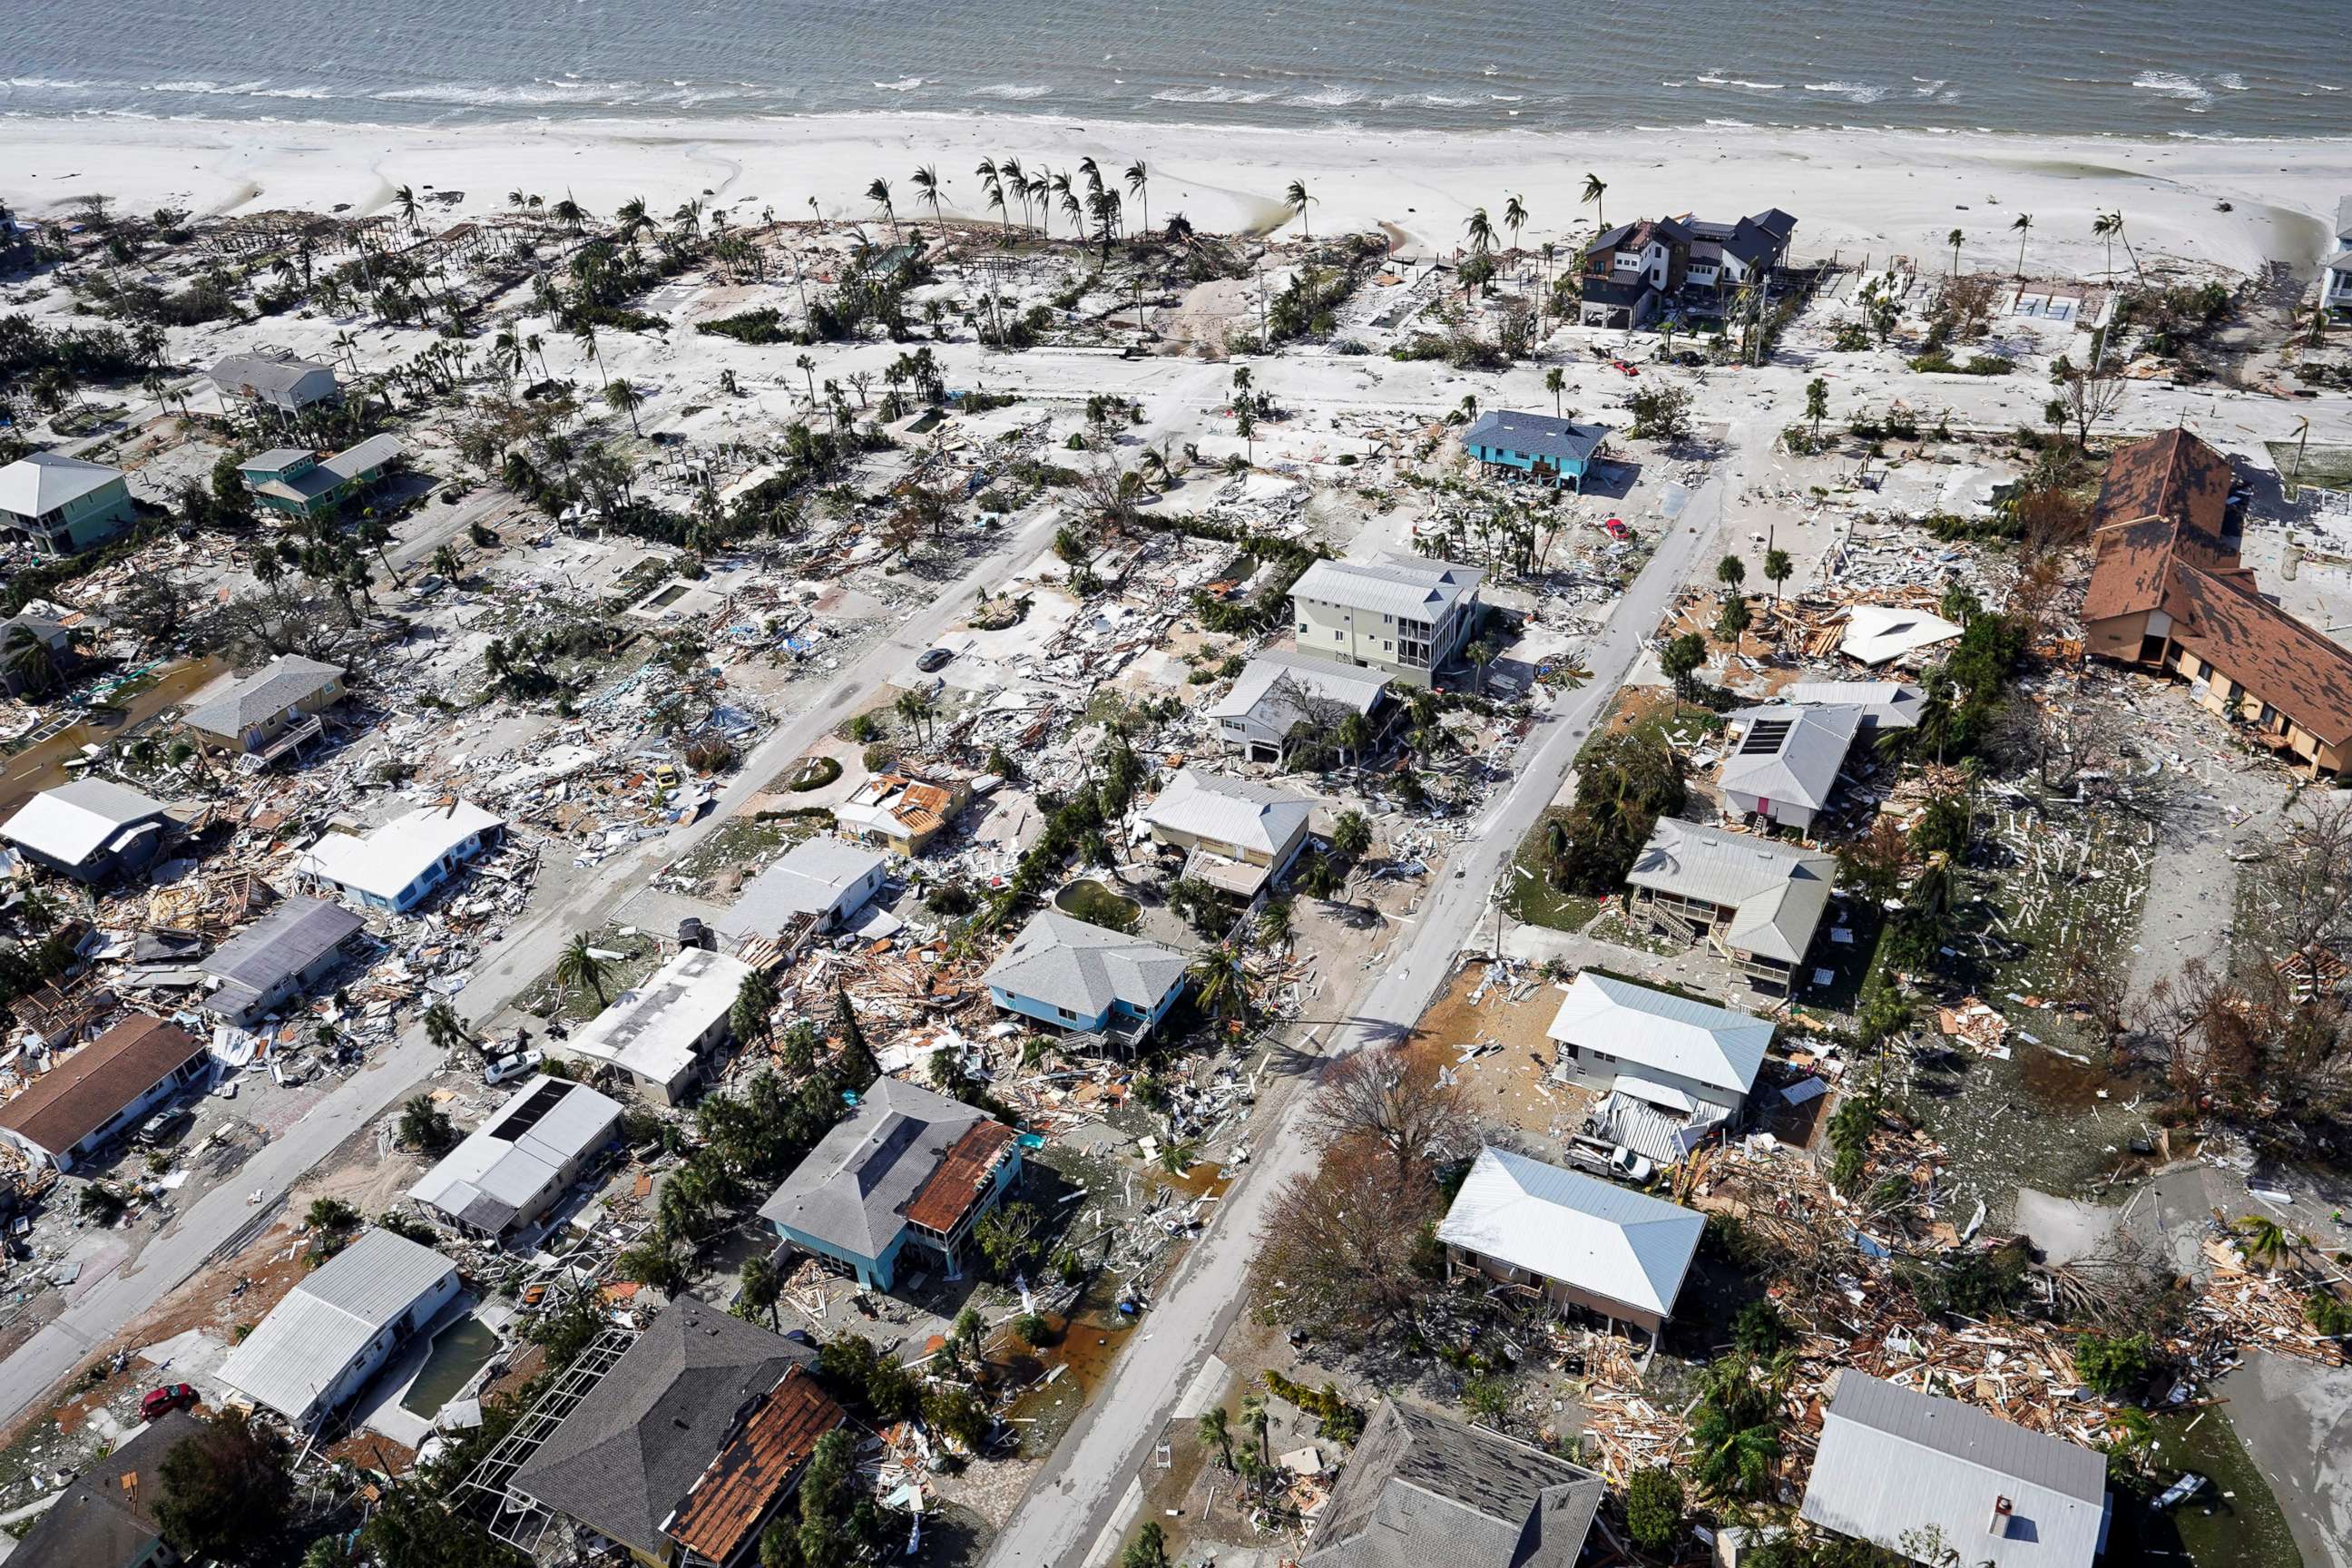 PHOTO: Damaged homes and debris in the aftermath of Hurricane Ian, Sept. 29, 2022, in Fort Myers, Fla.